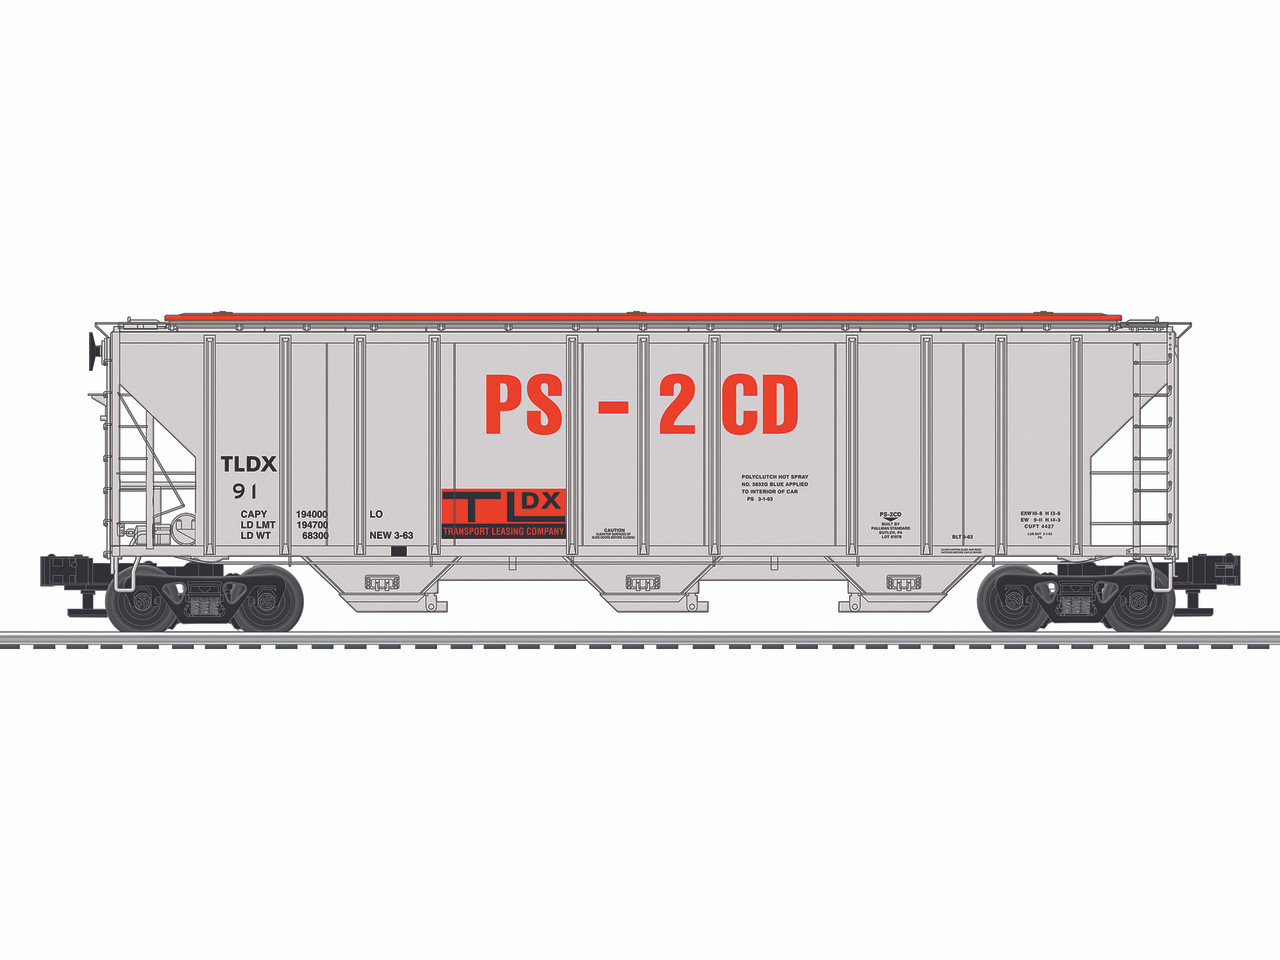 6-84128 O Scale Lionel TLDX Demonstrator PS-2CD Covered Hopper